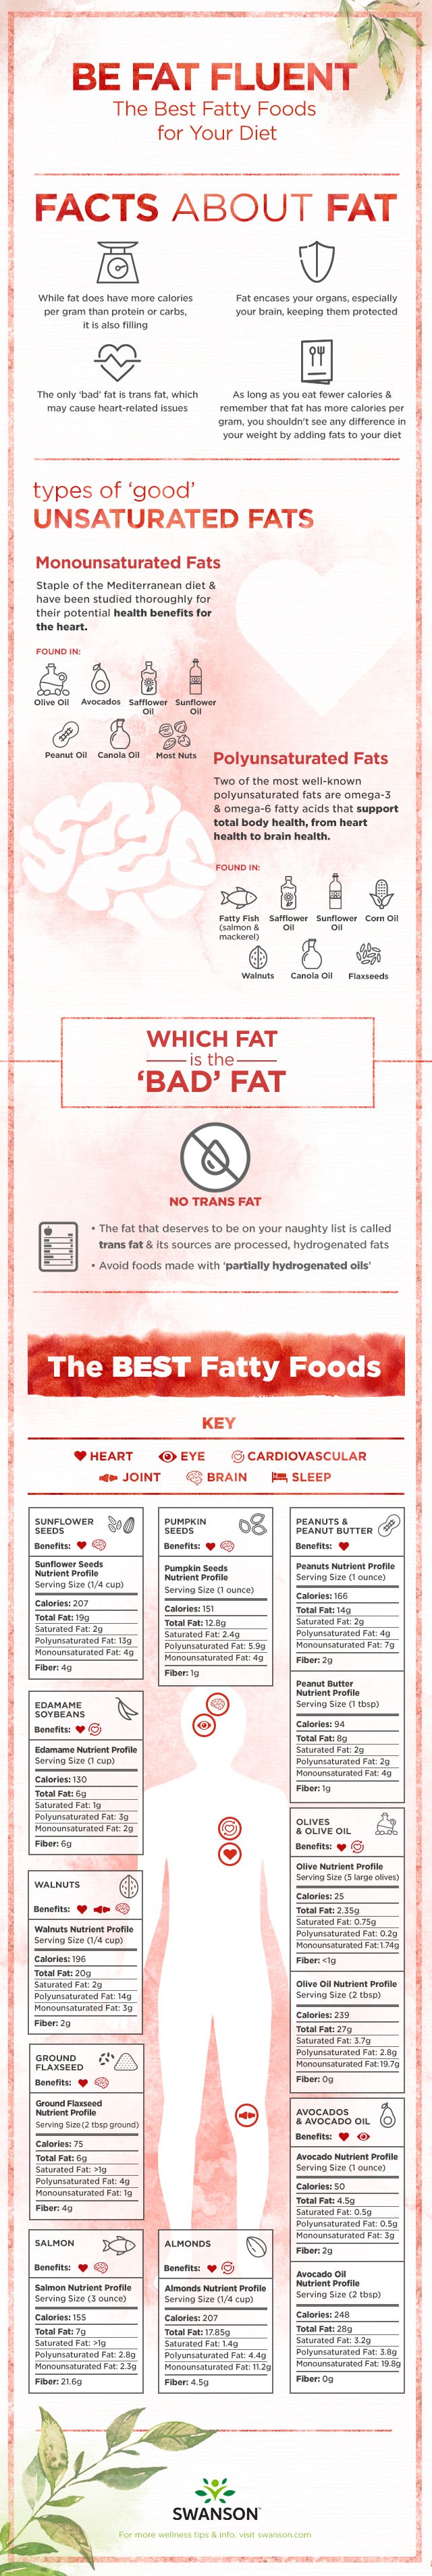 Be Fat Fluent Best Fatty Foods for Your Diet, list of good fatty foods